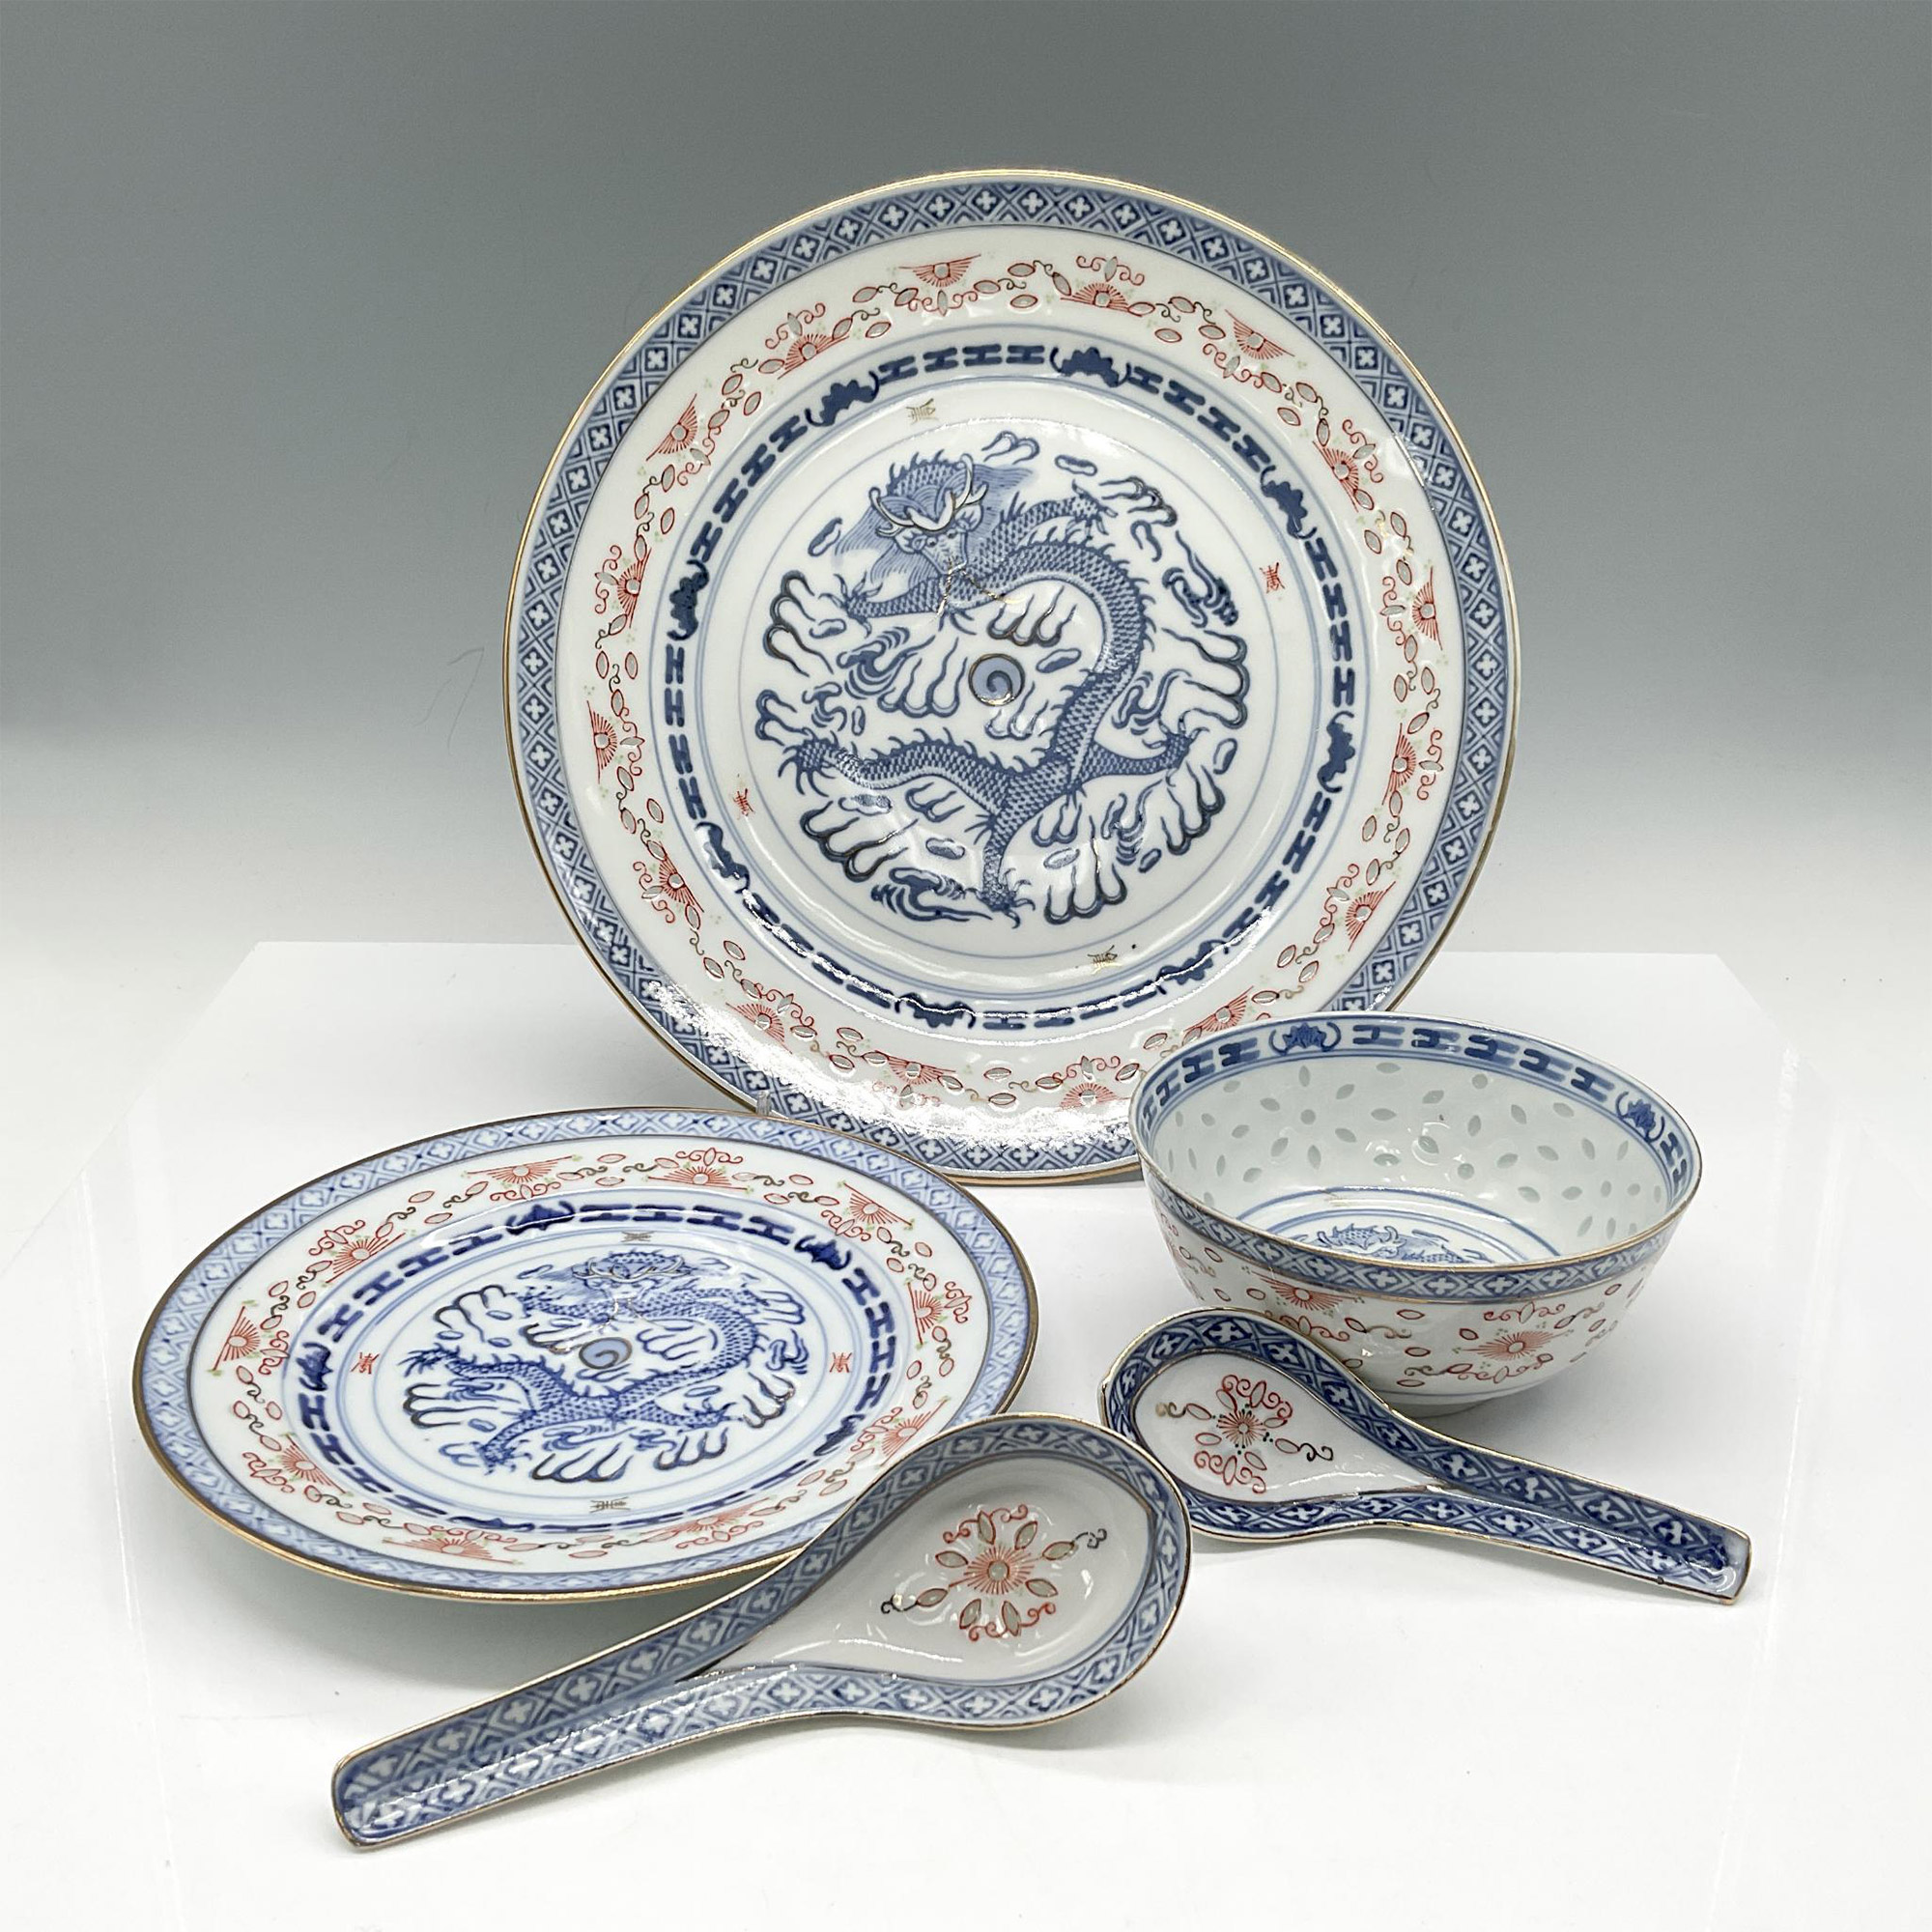 5pc Chinese Porcelain Blue Dragon Server Ware - Image 2 of 3